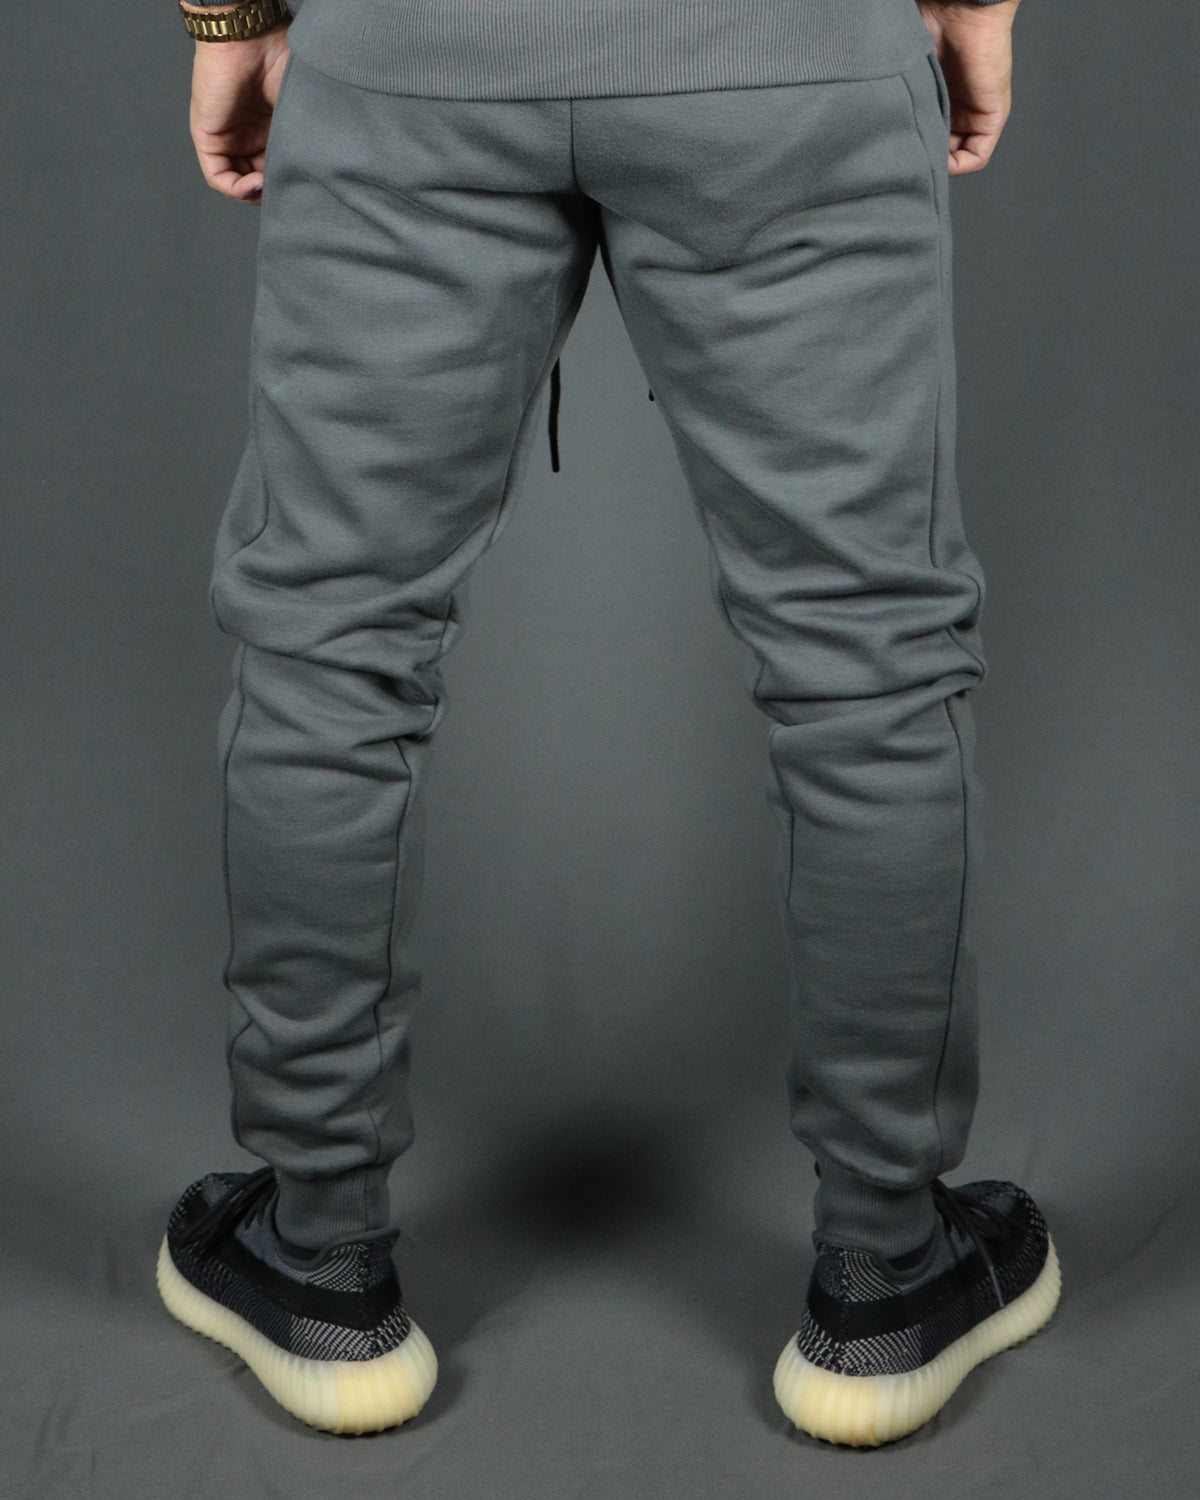 The back side of the Jordan Craig charcoal jogger pants with logo trim bottom.